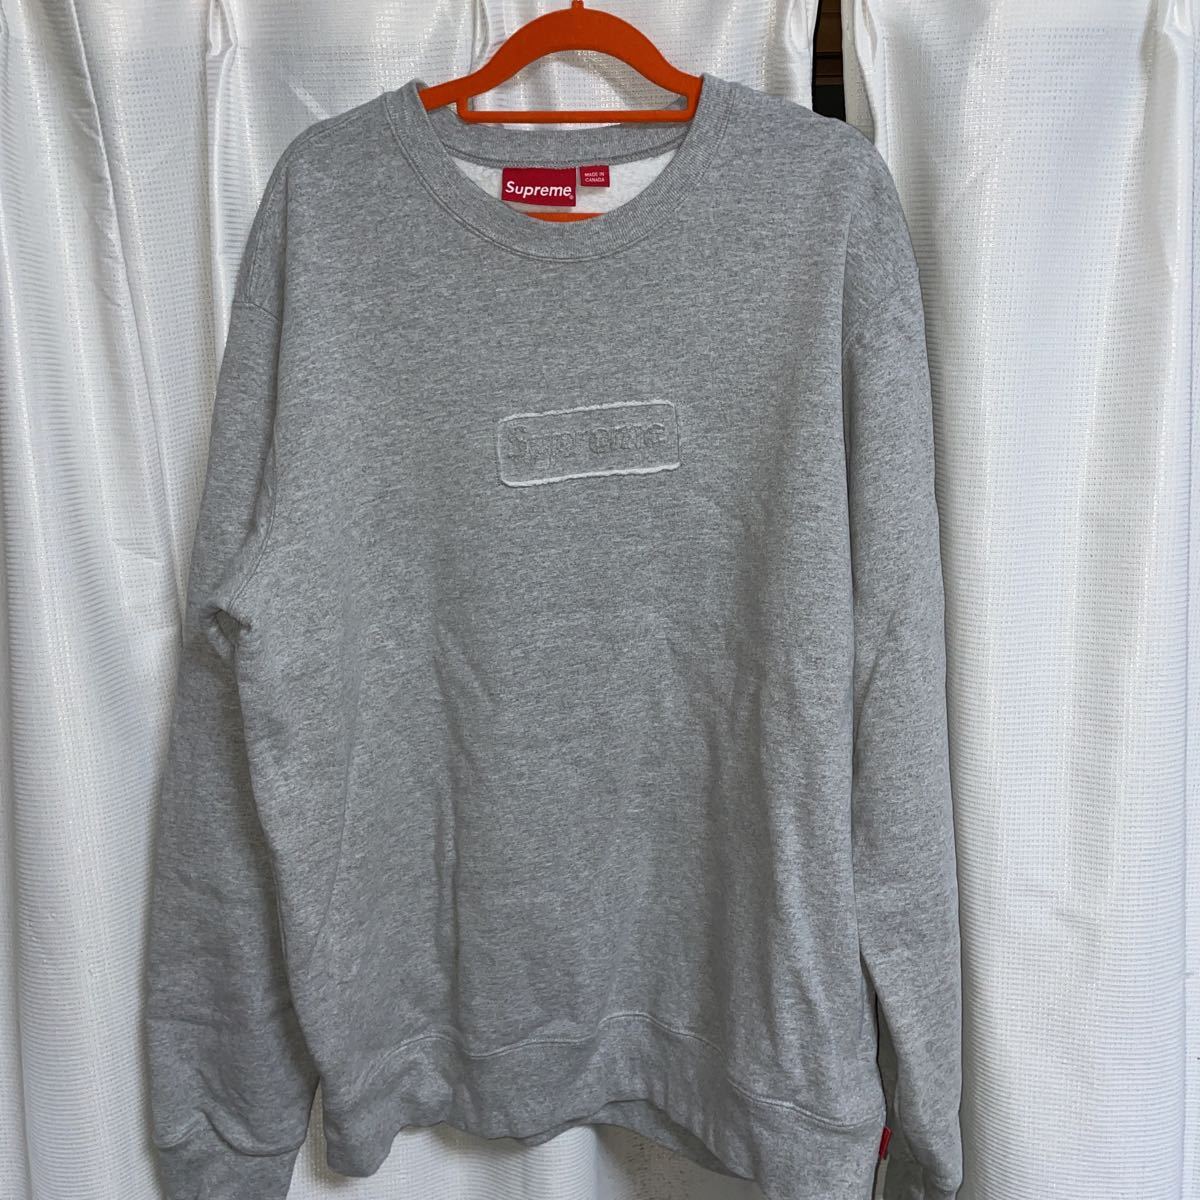 Supreme Cutout Logo Crewneck 的詳細資料| One Map by FROM JAPAN為您